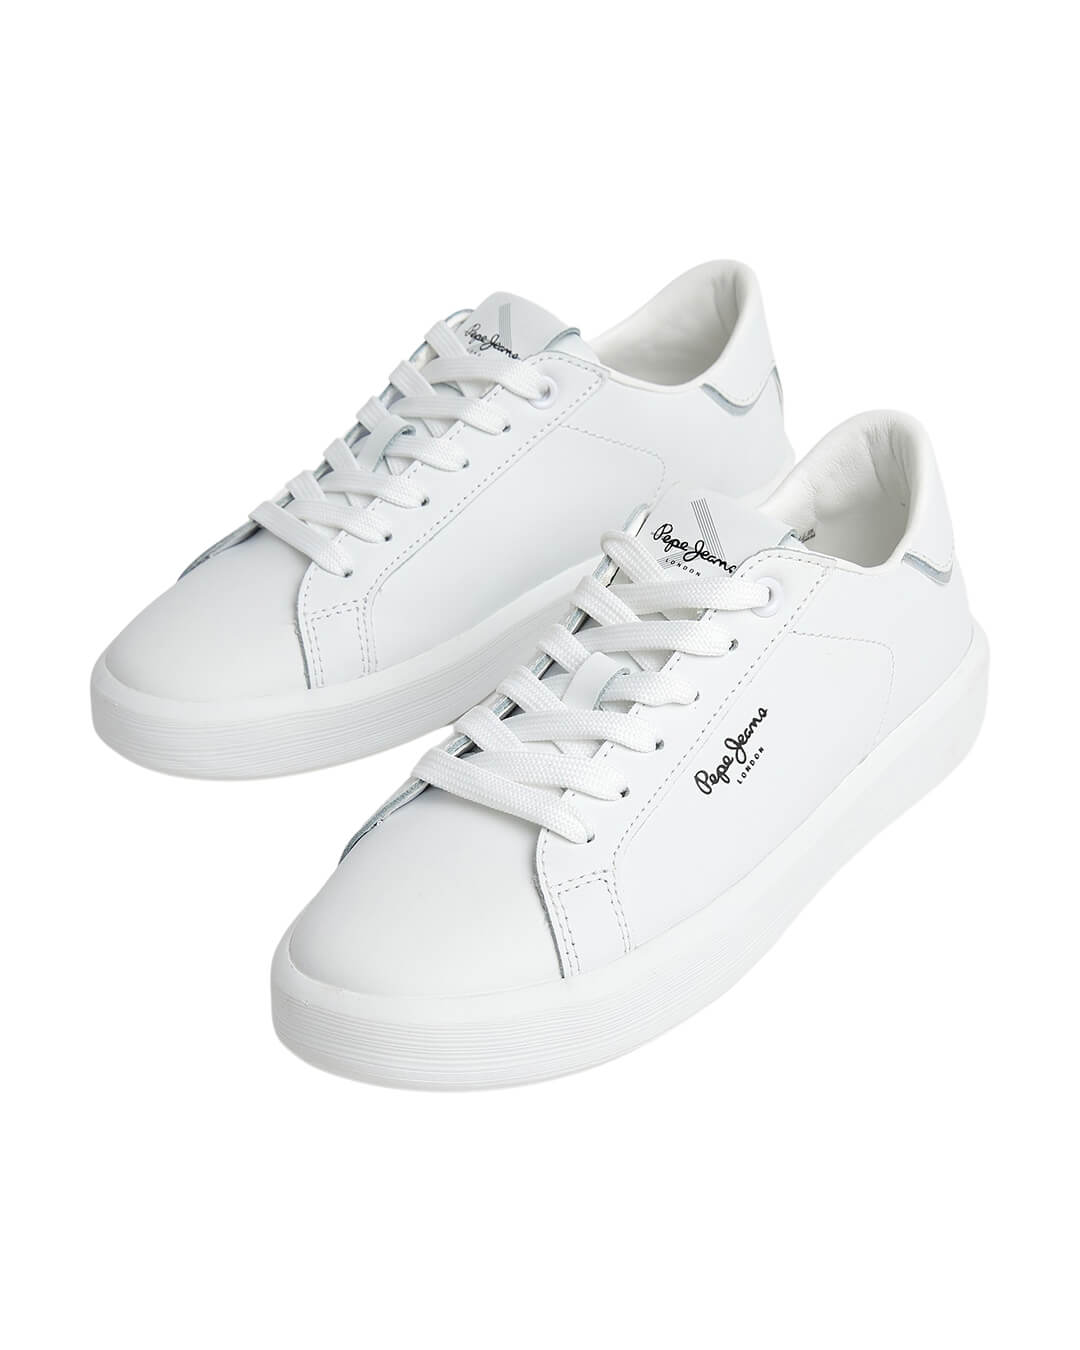 Pepe Jeans Shoes Pepe Jeans Dobbie White Bass Sneakers